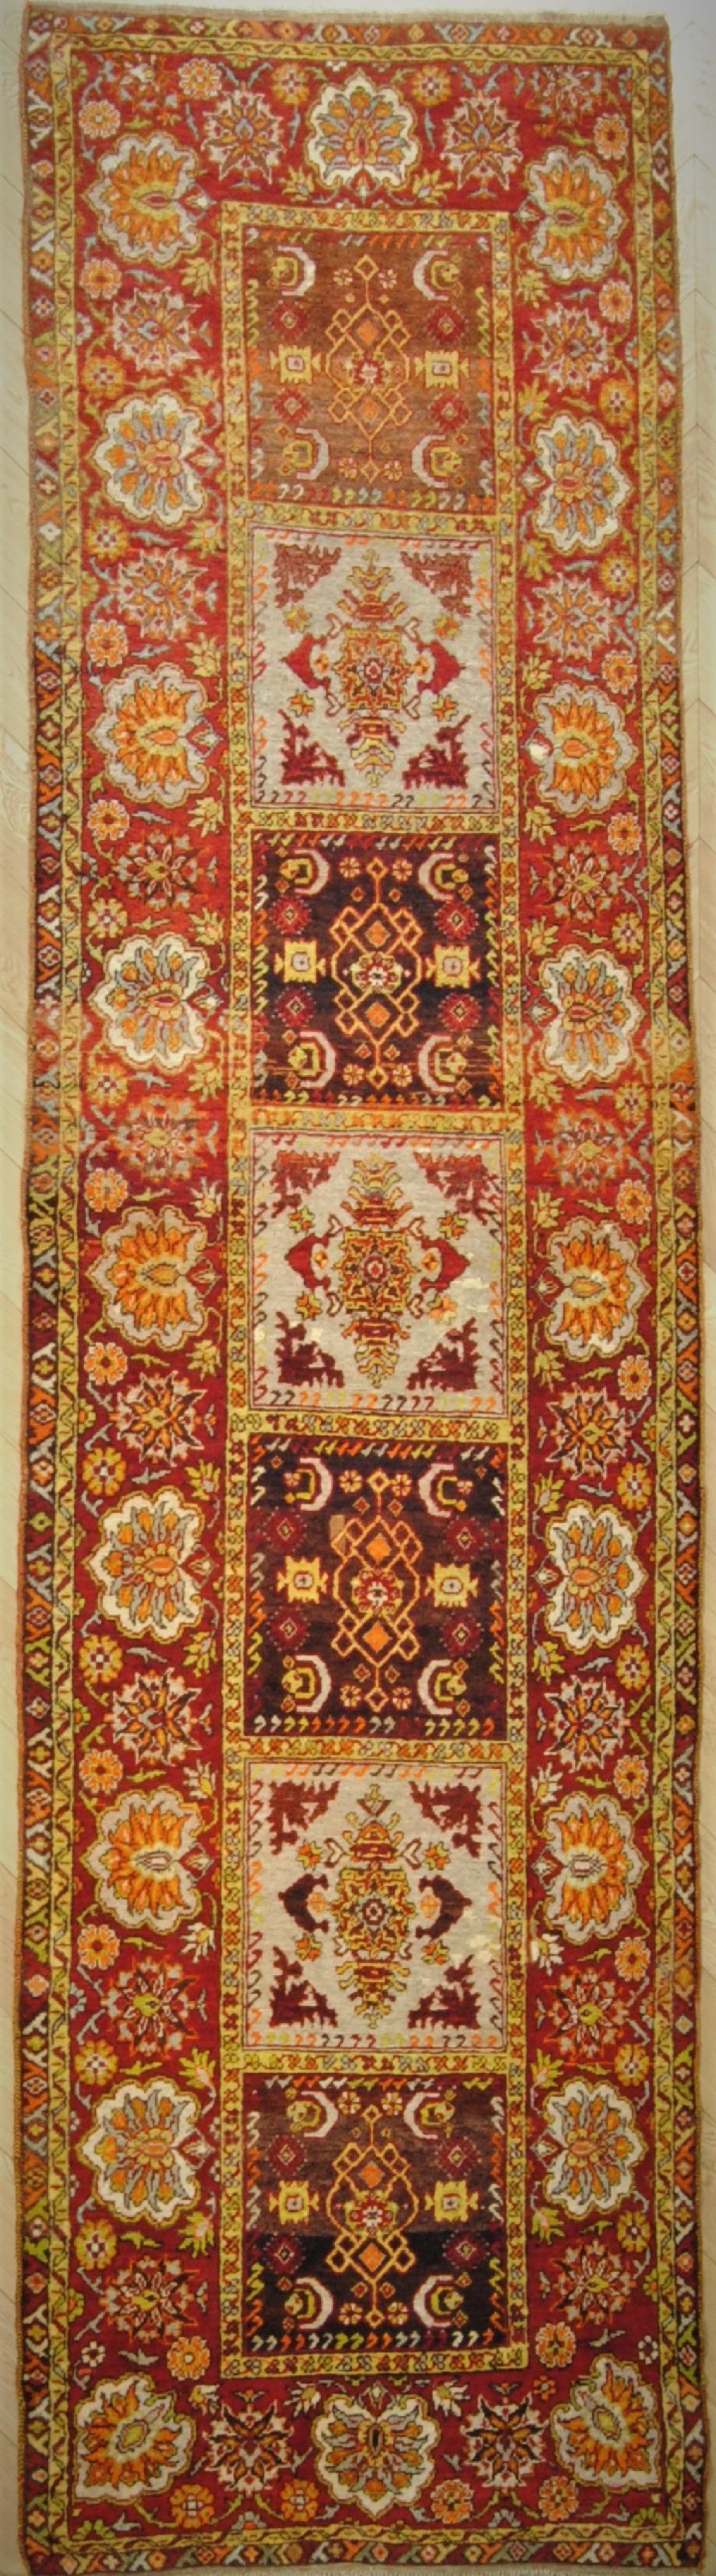 This fine anatolian rug comes from the FETHIYE area on the west coast. Its main features in addition to the soft and shiny wool are the warm colors of the earth and the decoration that is more graceful than other carpets of Anatolian production. The